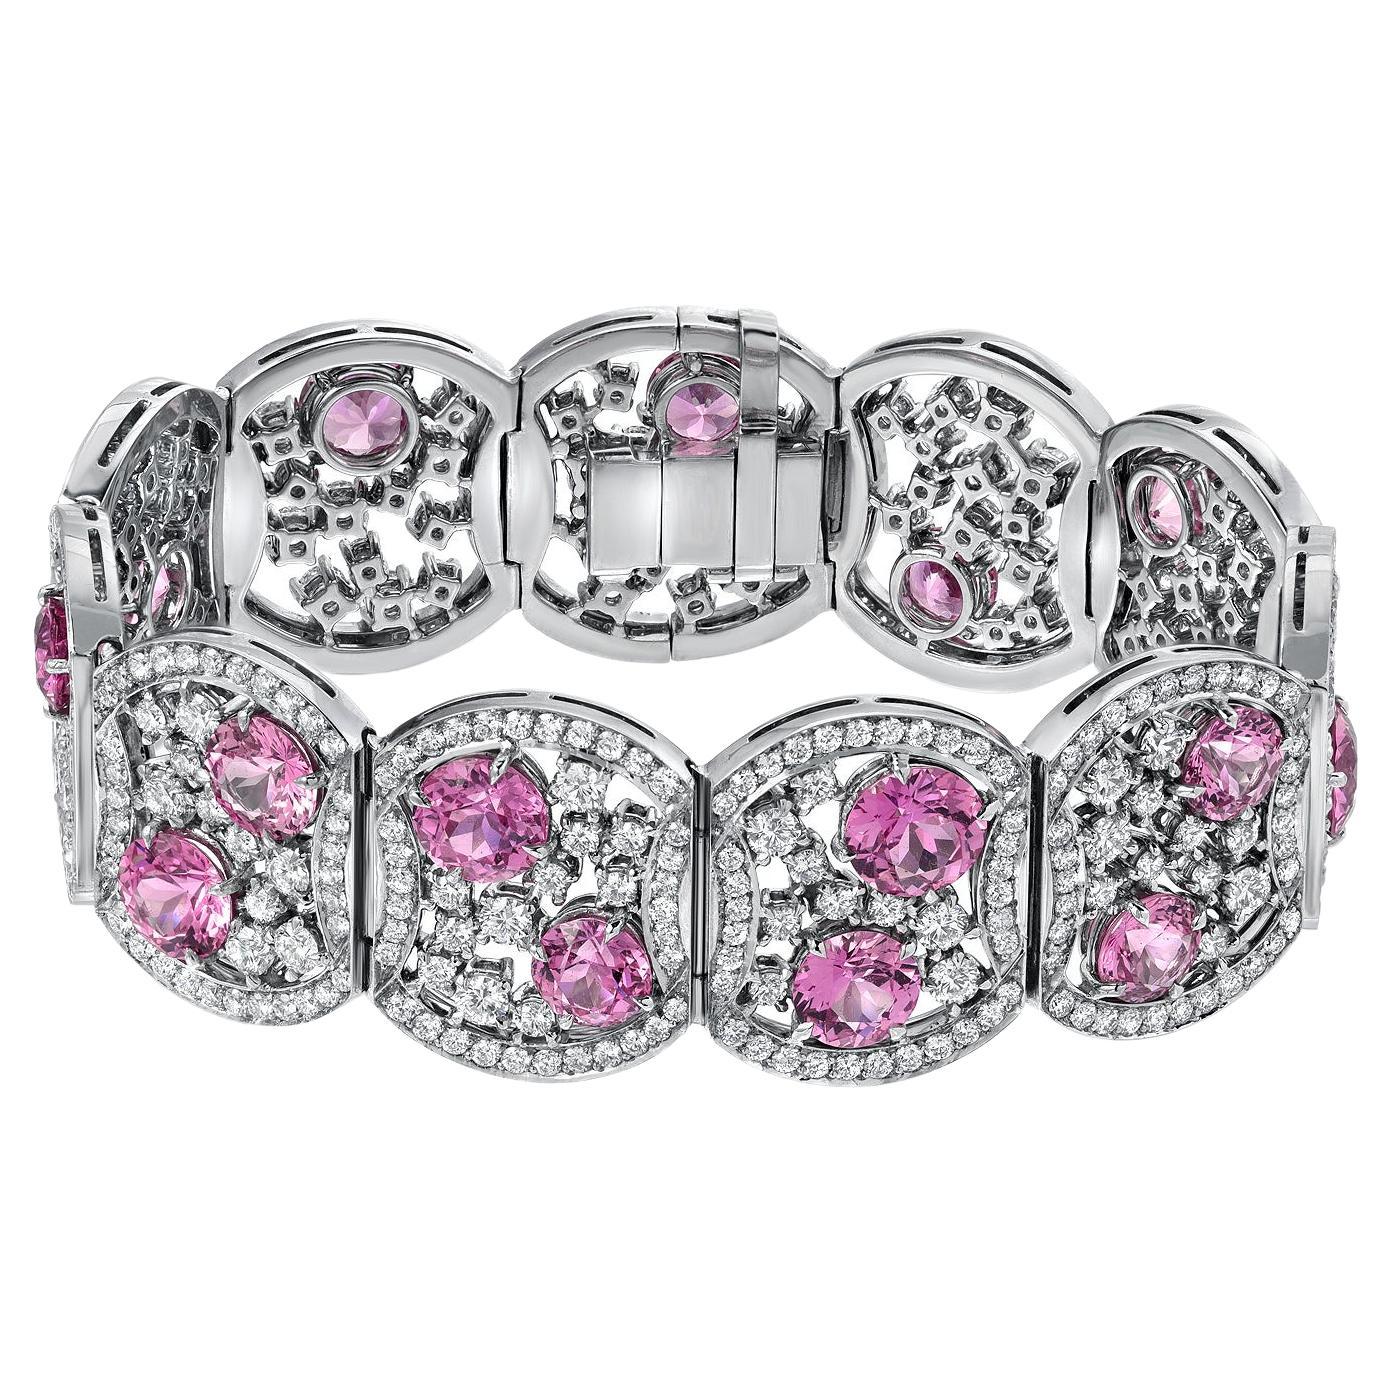 Extraordinary one of a kind platinum diamond bracelet, set with 15 ultra fine round Pink Sapphires, weighing a total of 19.54 carats, and round brilliant diamonds weighing a total of 10.99 carats.
Total length: 7 inches.
Total width: 1.75